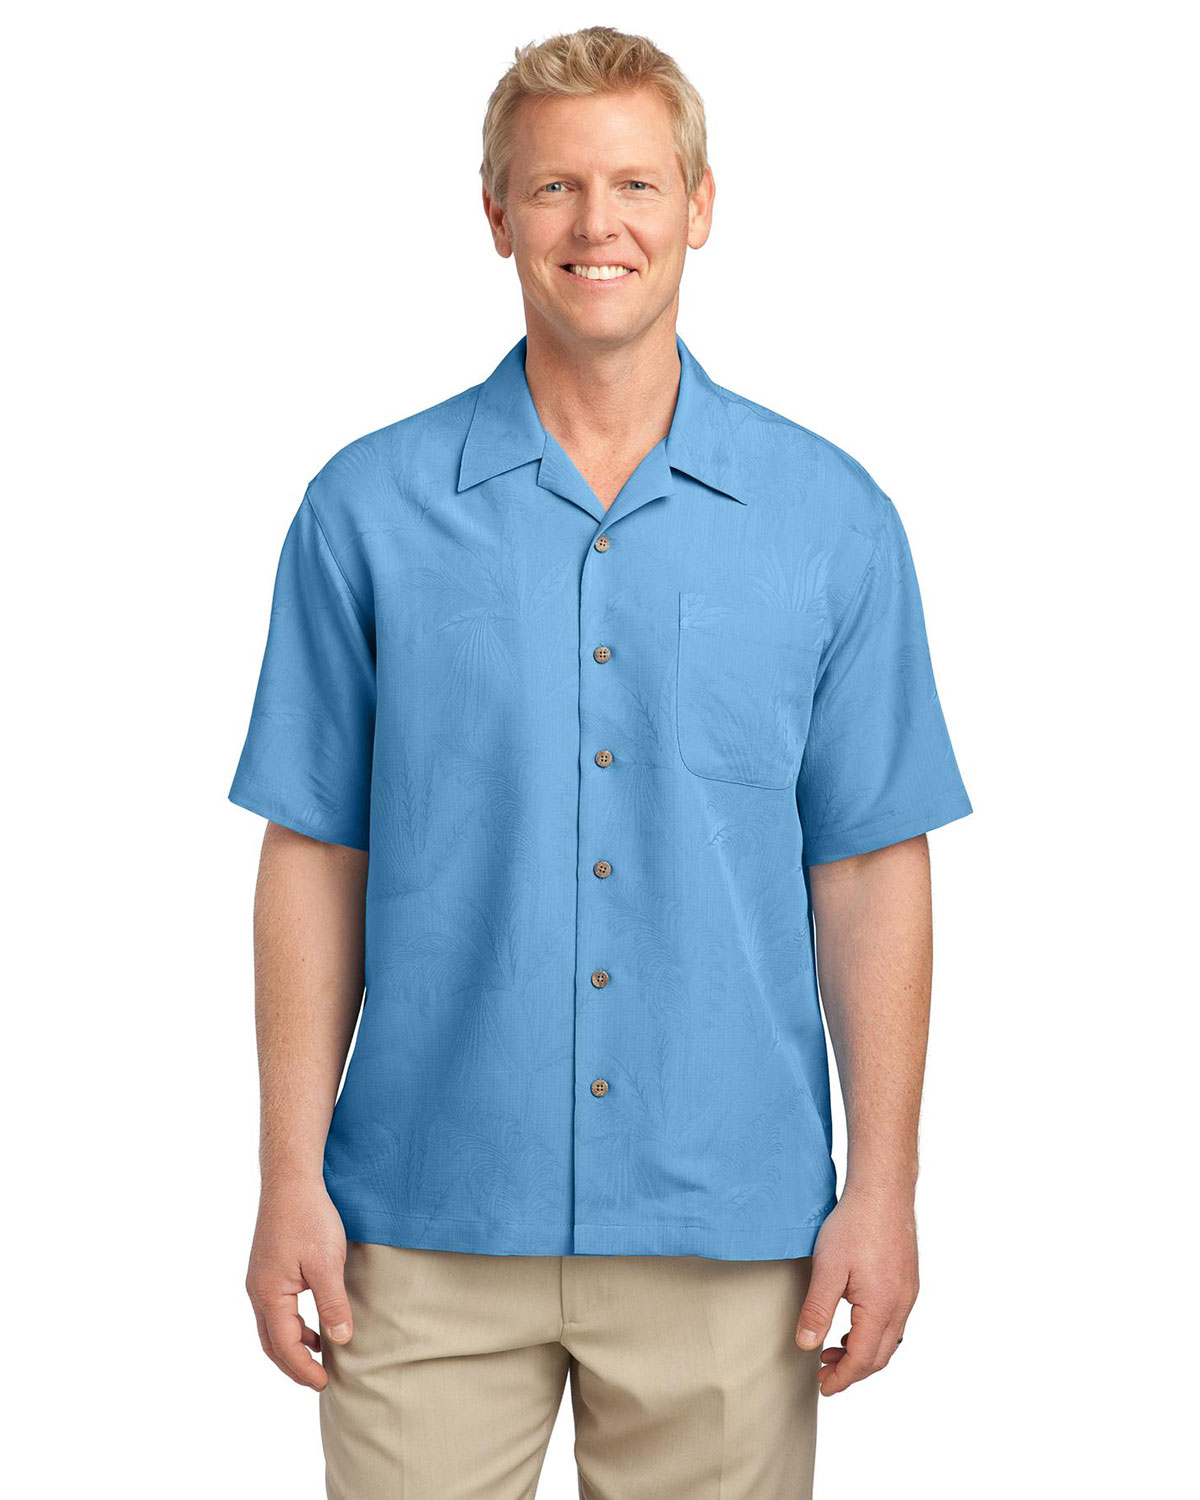 Port Authority S536 Men Patterned Easy Care Camp Shirt at Apparelstation